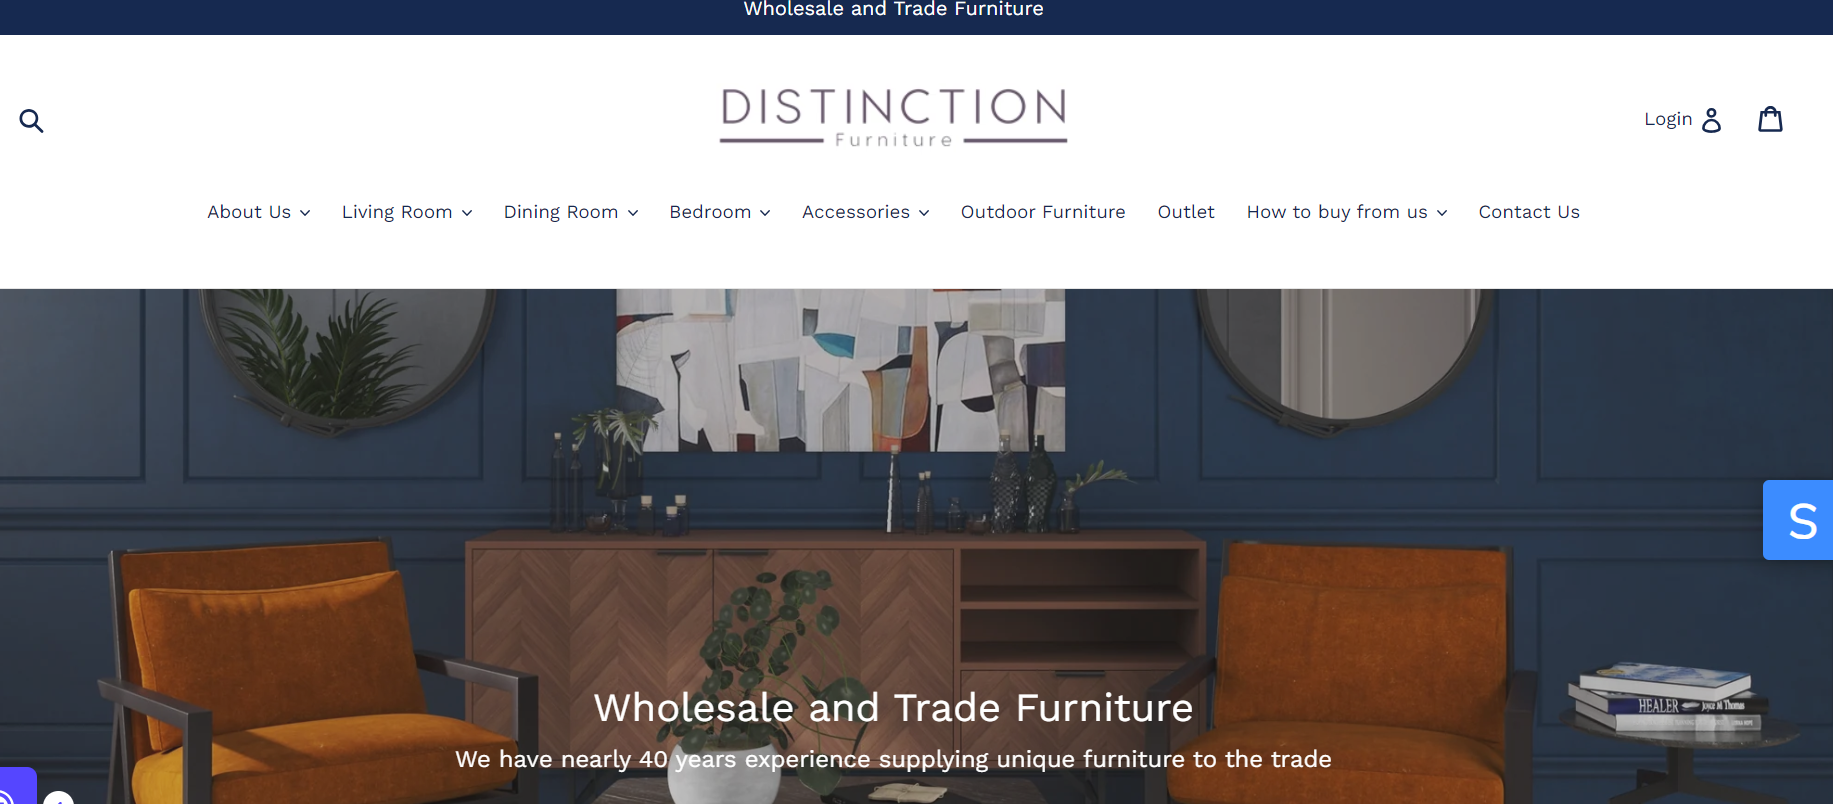 Distinction Furniture, a UK-based furniture supplier, specializes in high-quality designer furniture for the wholesale and trade markets. 